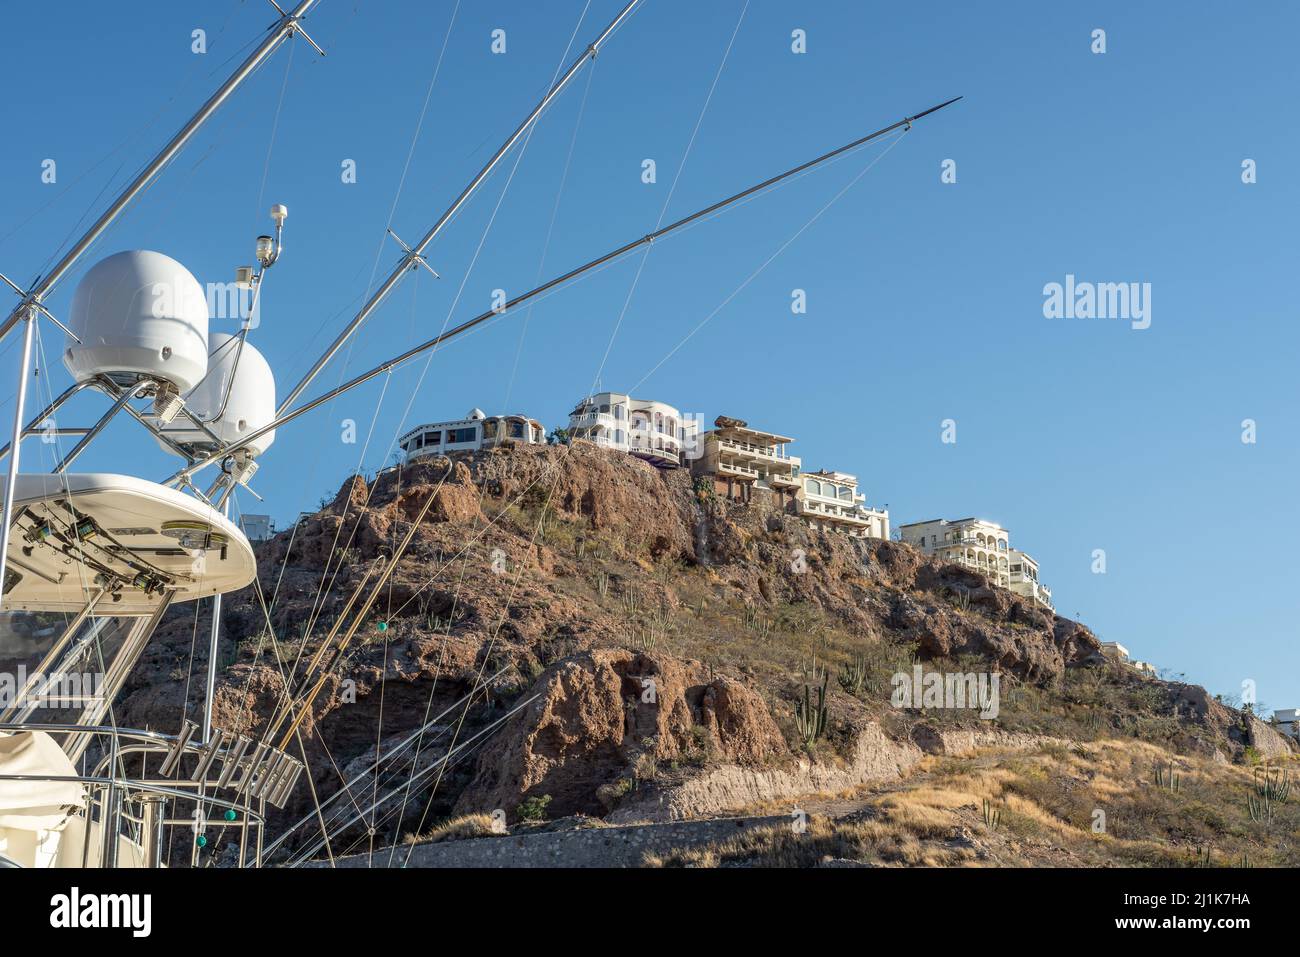 Shooting across the stern of fishing boat with satellite domes, outrigger poles with fishing lines, to houses on a rocky hill, San Carlos, Sonora, Mx. Stock Photo